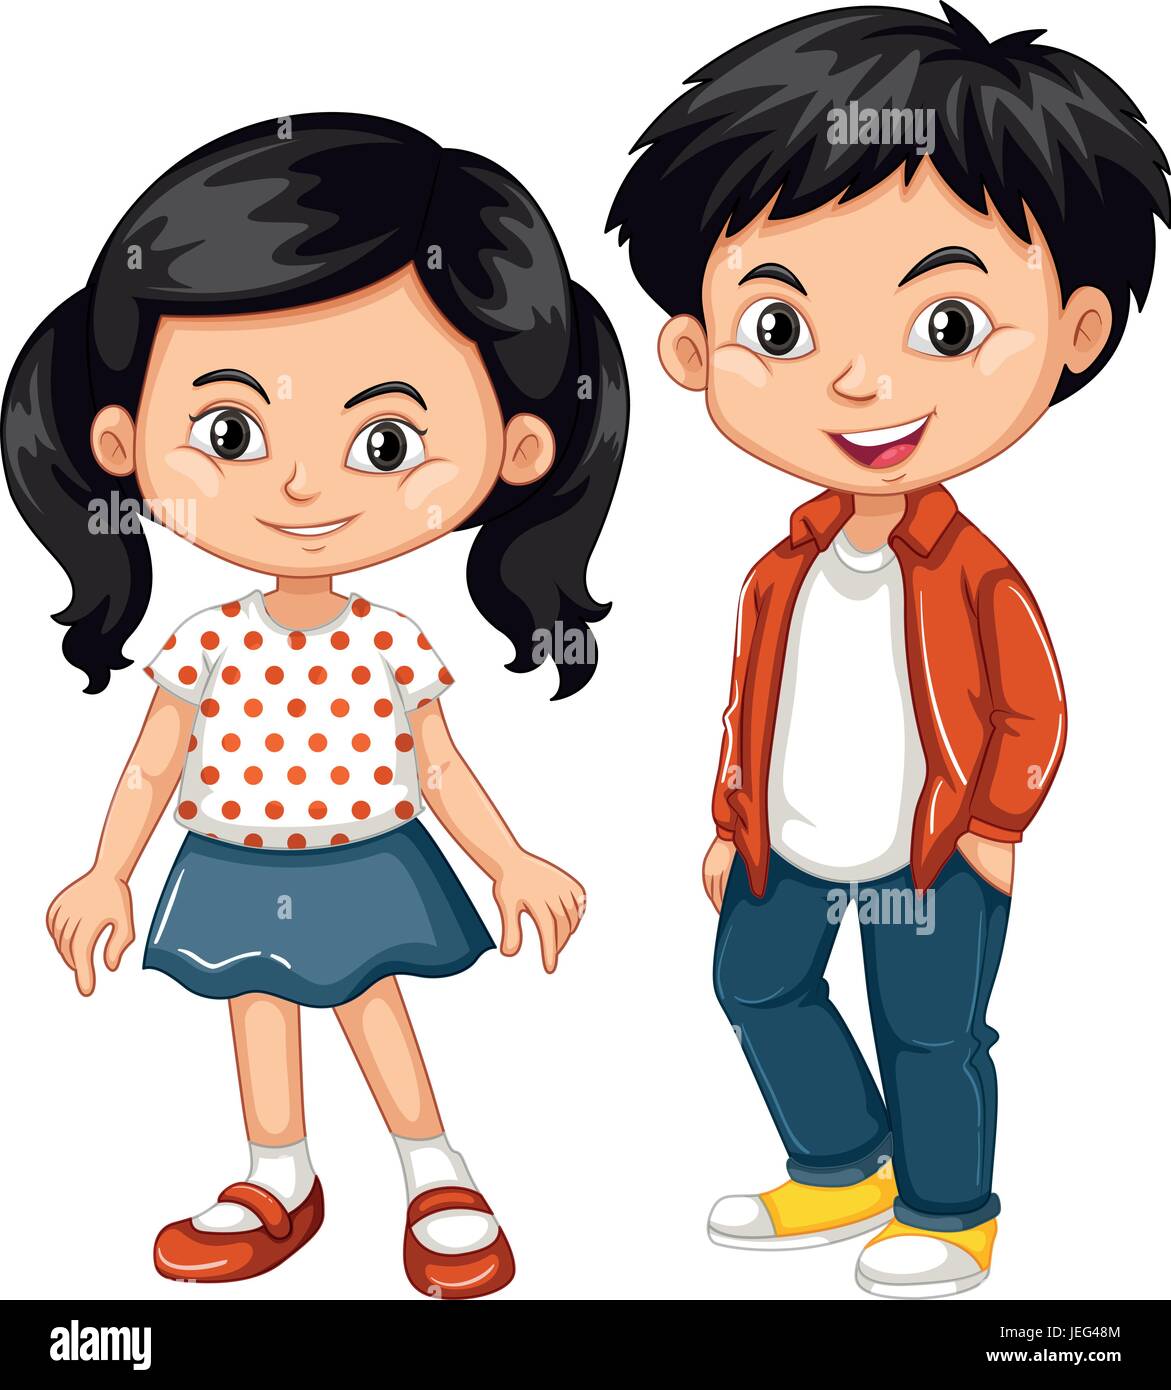 Asian boy and girl standing illustration Stock Vector